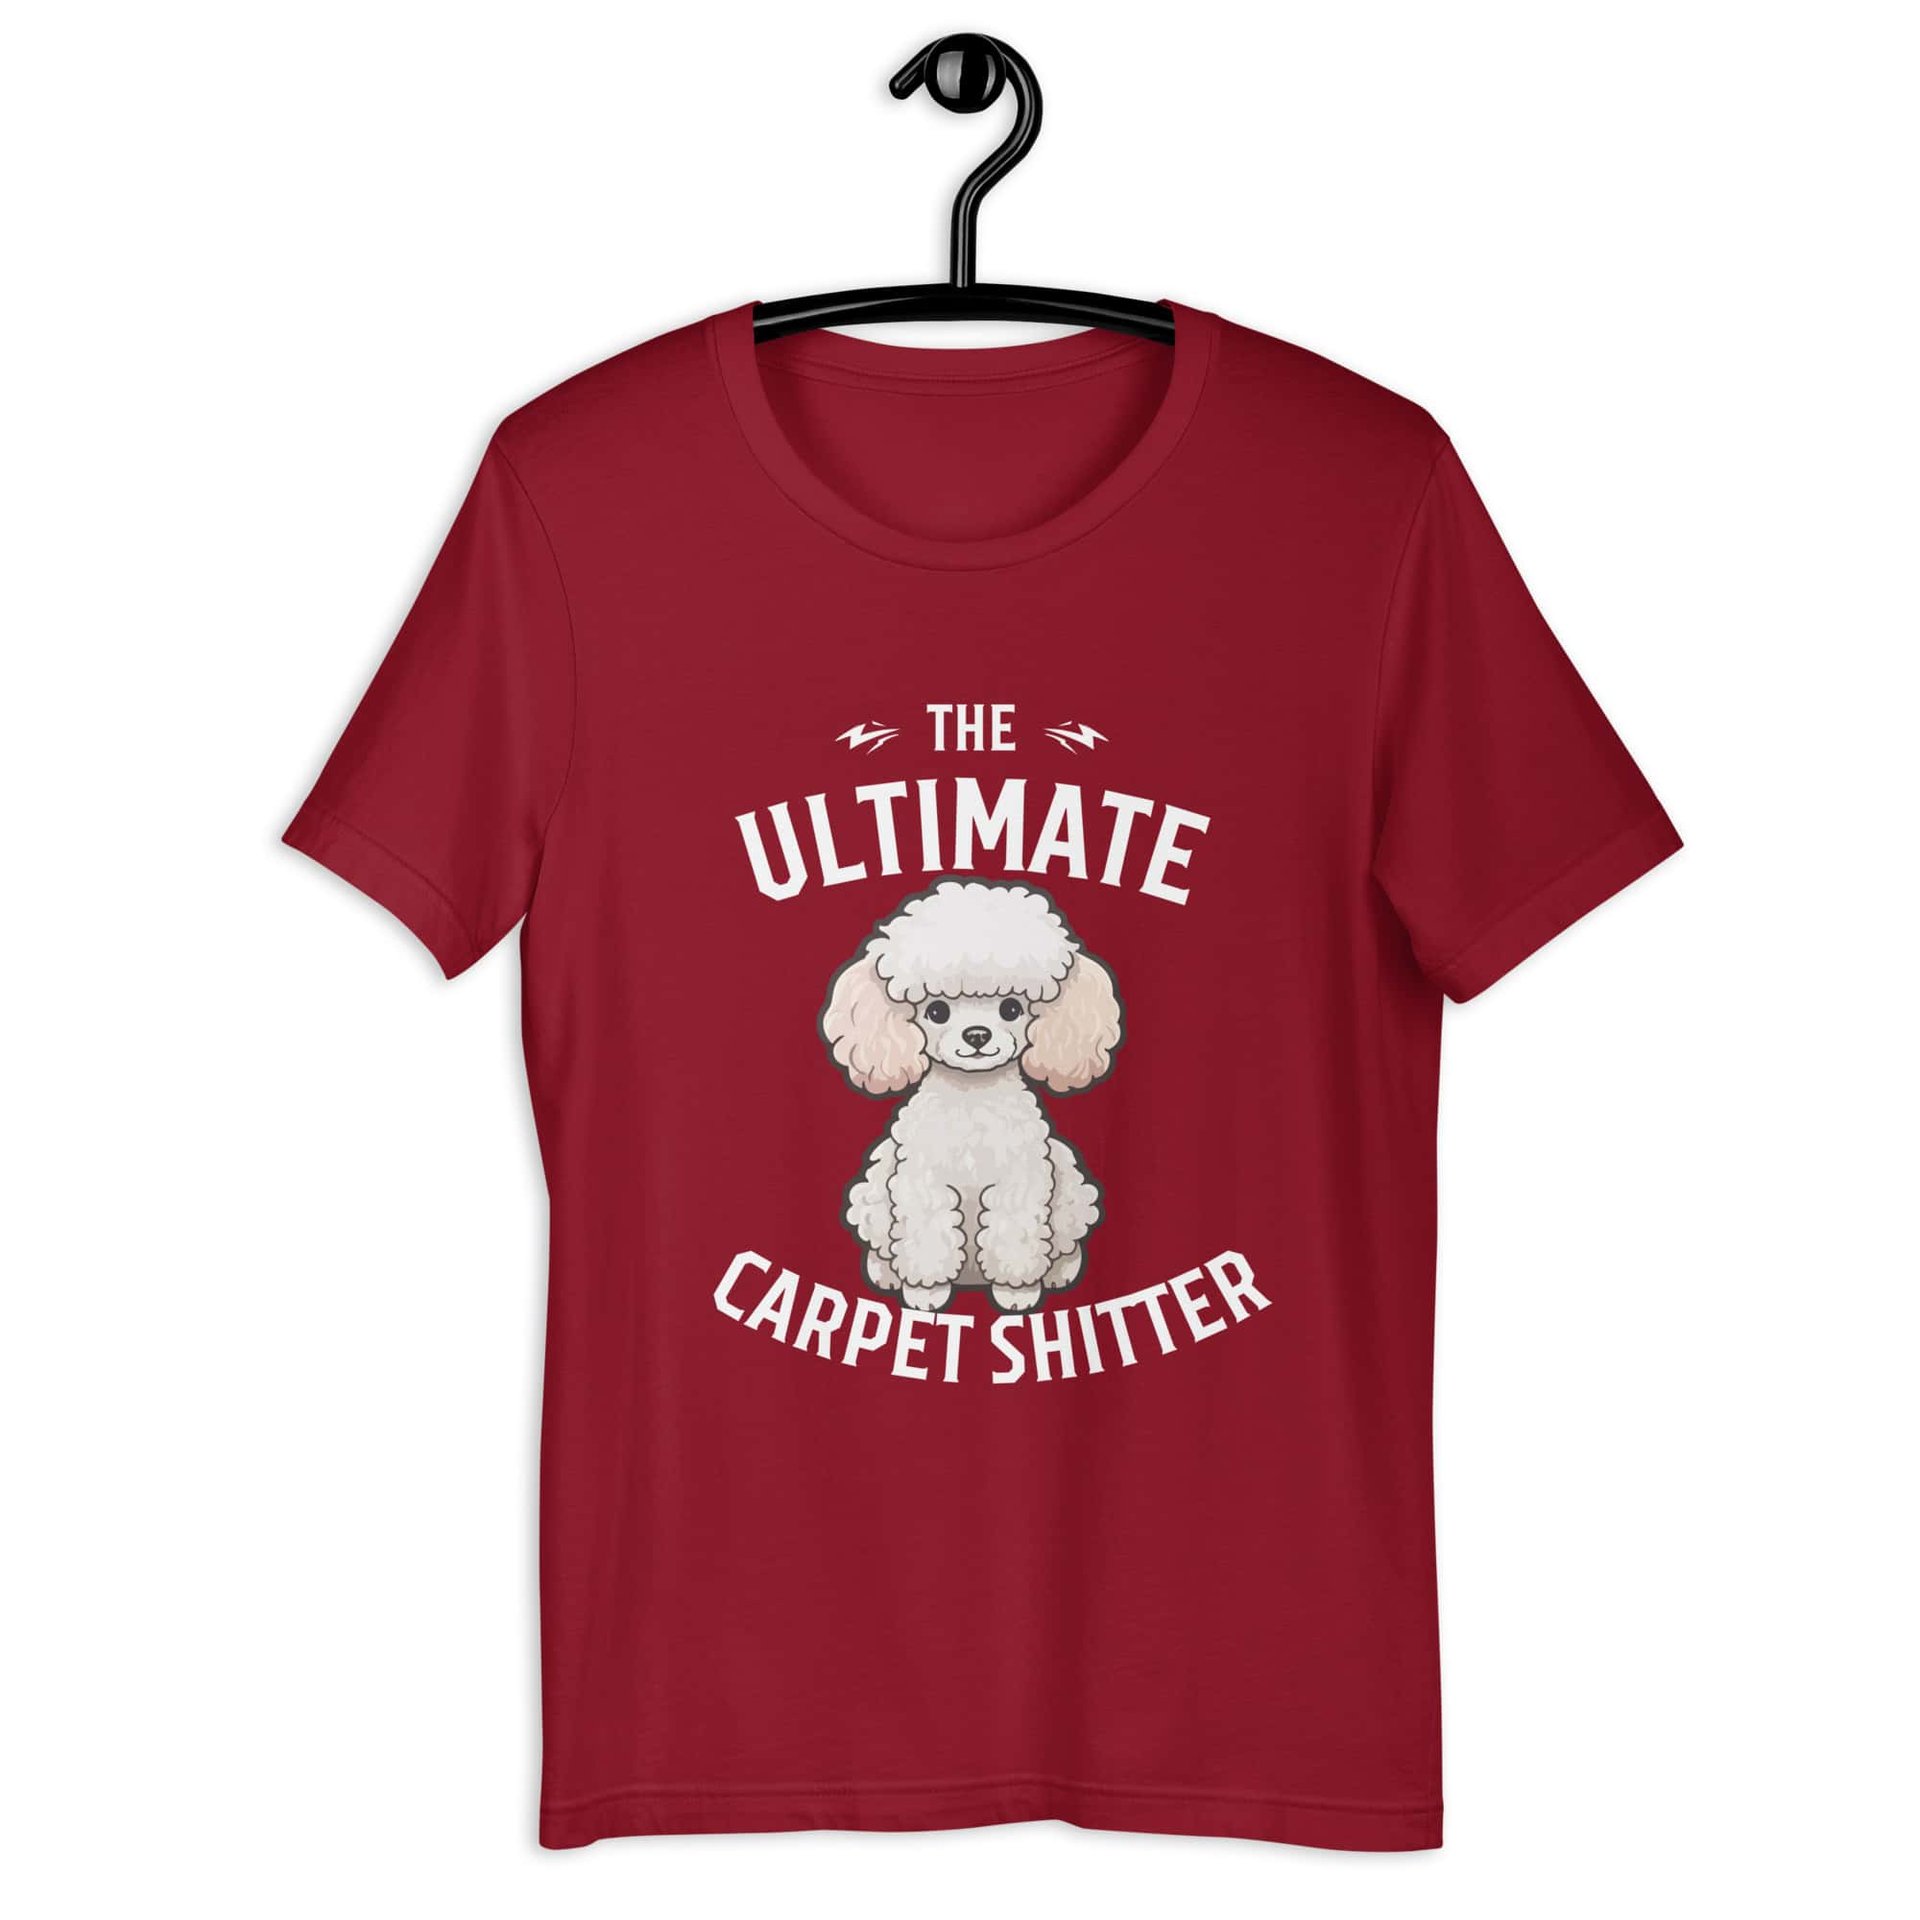 The Ultimate Carpet Shitter Funny Poodle Unisex T-Shirt maroon